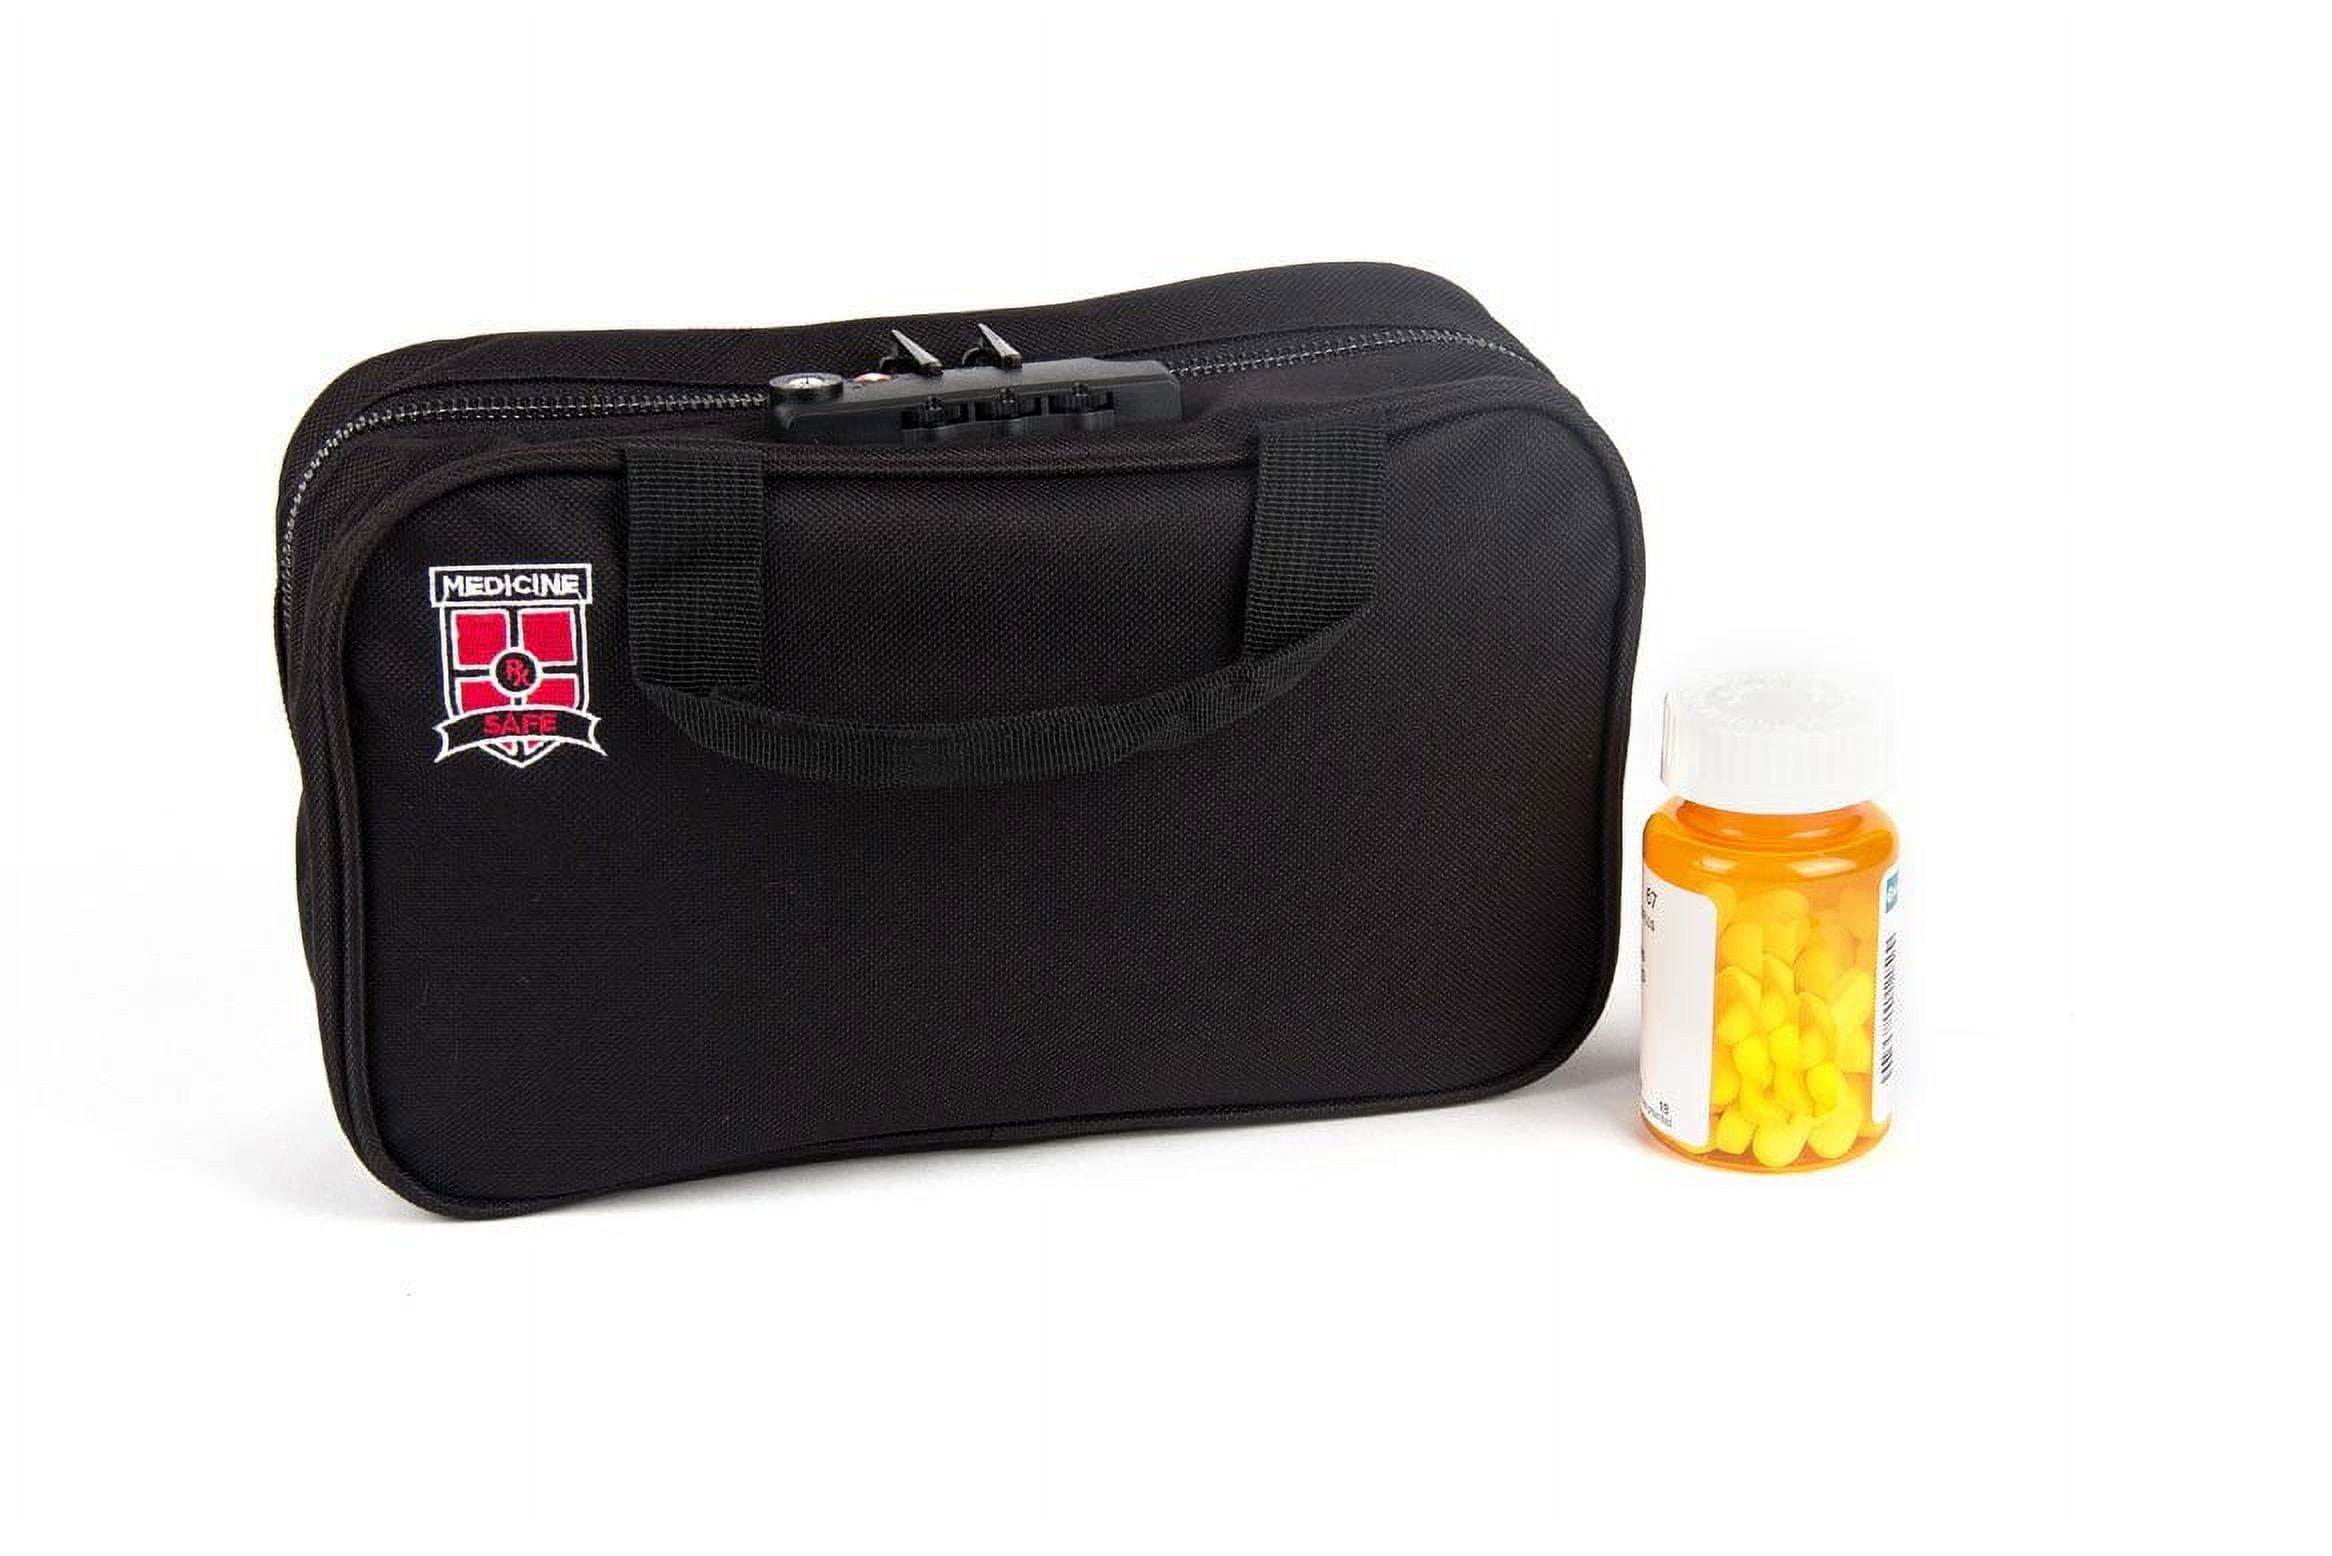 38 Best Items to Pack in Your Travel Medicine Bag